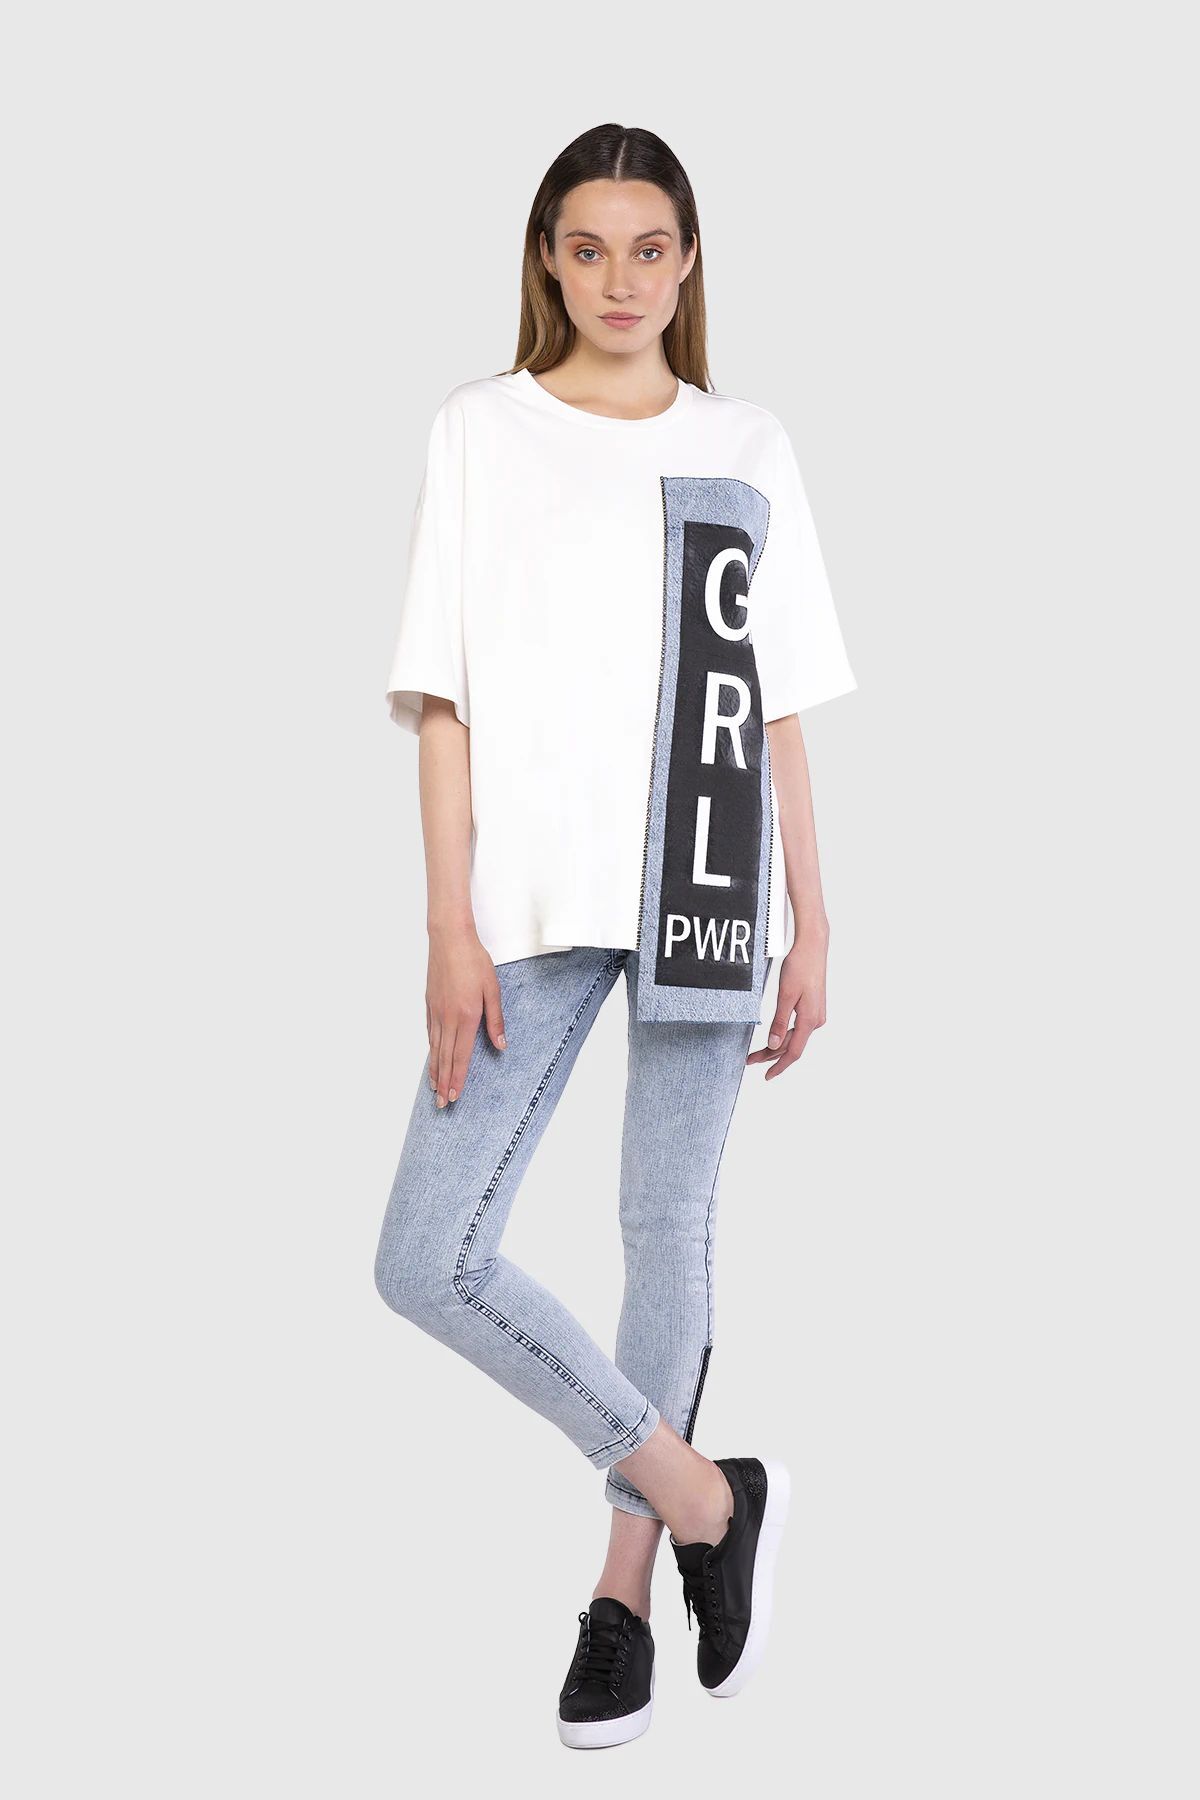  GIZIA - T-shirt with Text Print on Jeans and Strase Stone Embroidered